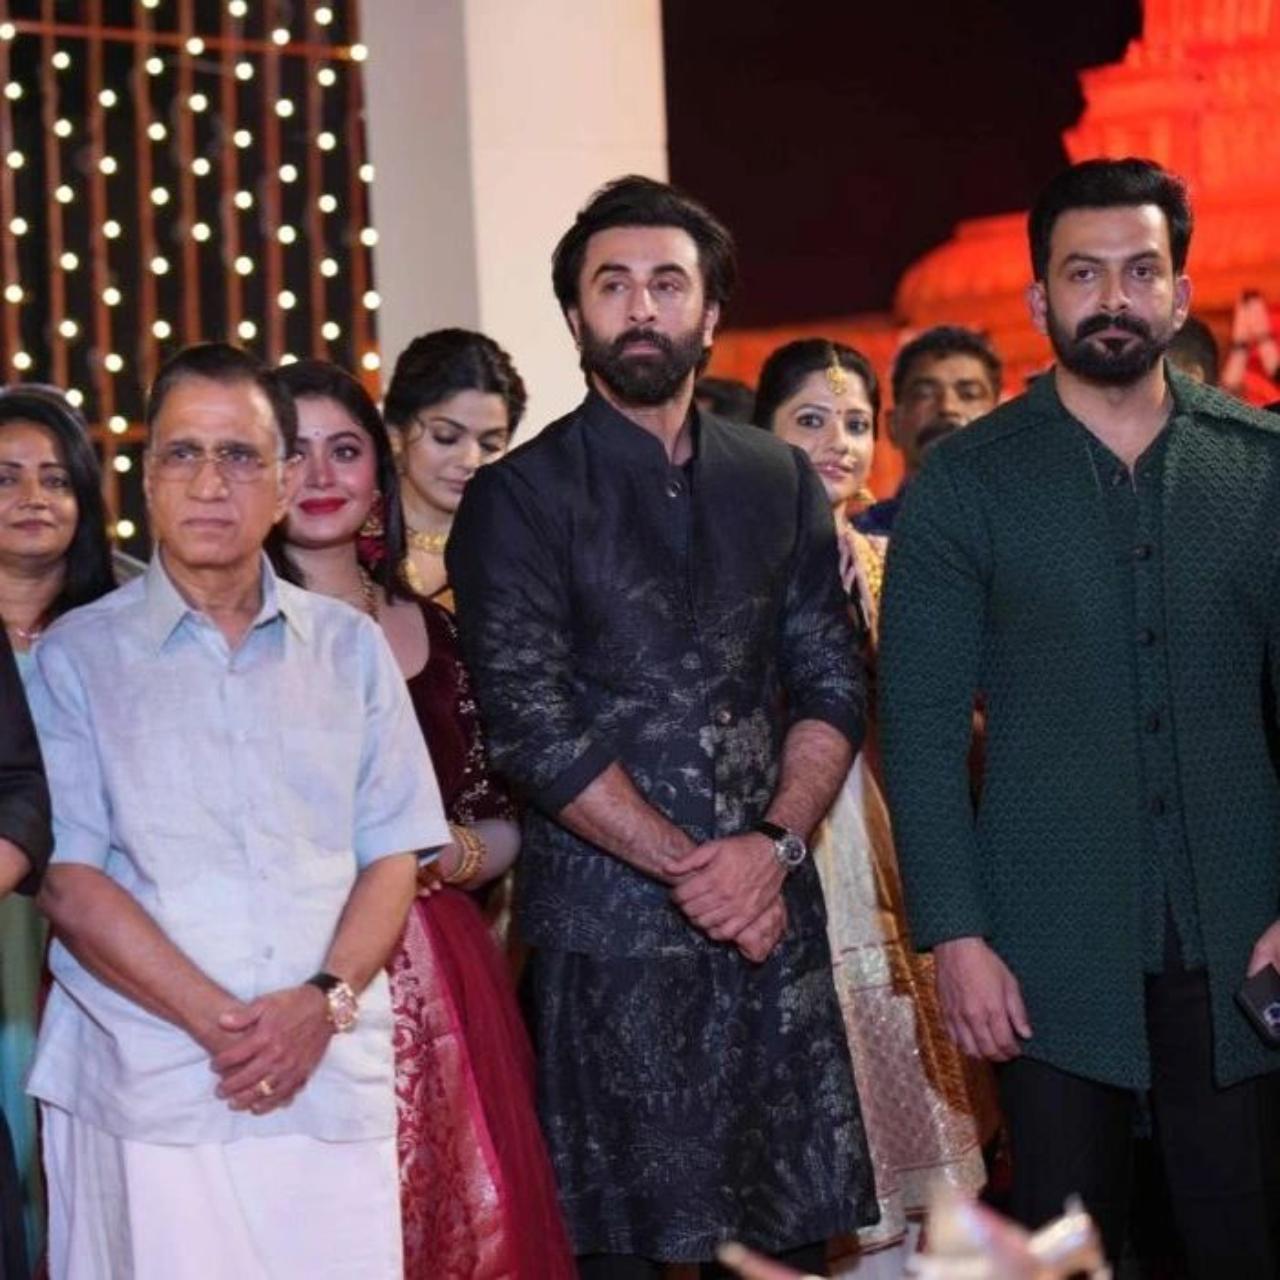 Malayalam film superstar Prithviraj along with his wife also attended the event. A picture of Prithviraj standing near Ranbir has gone viral